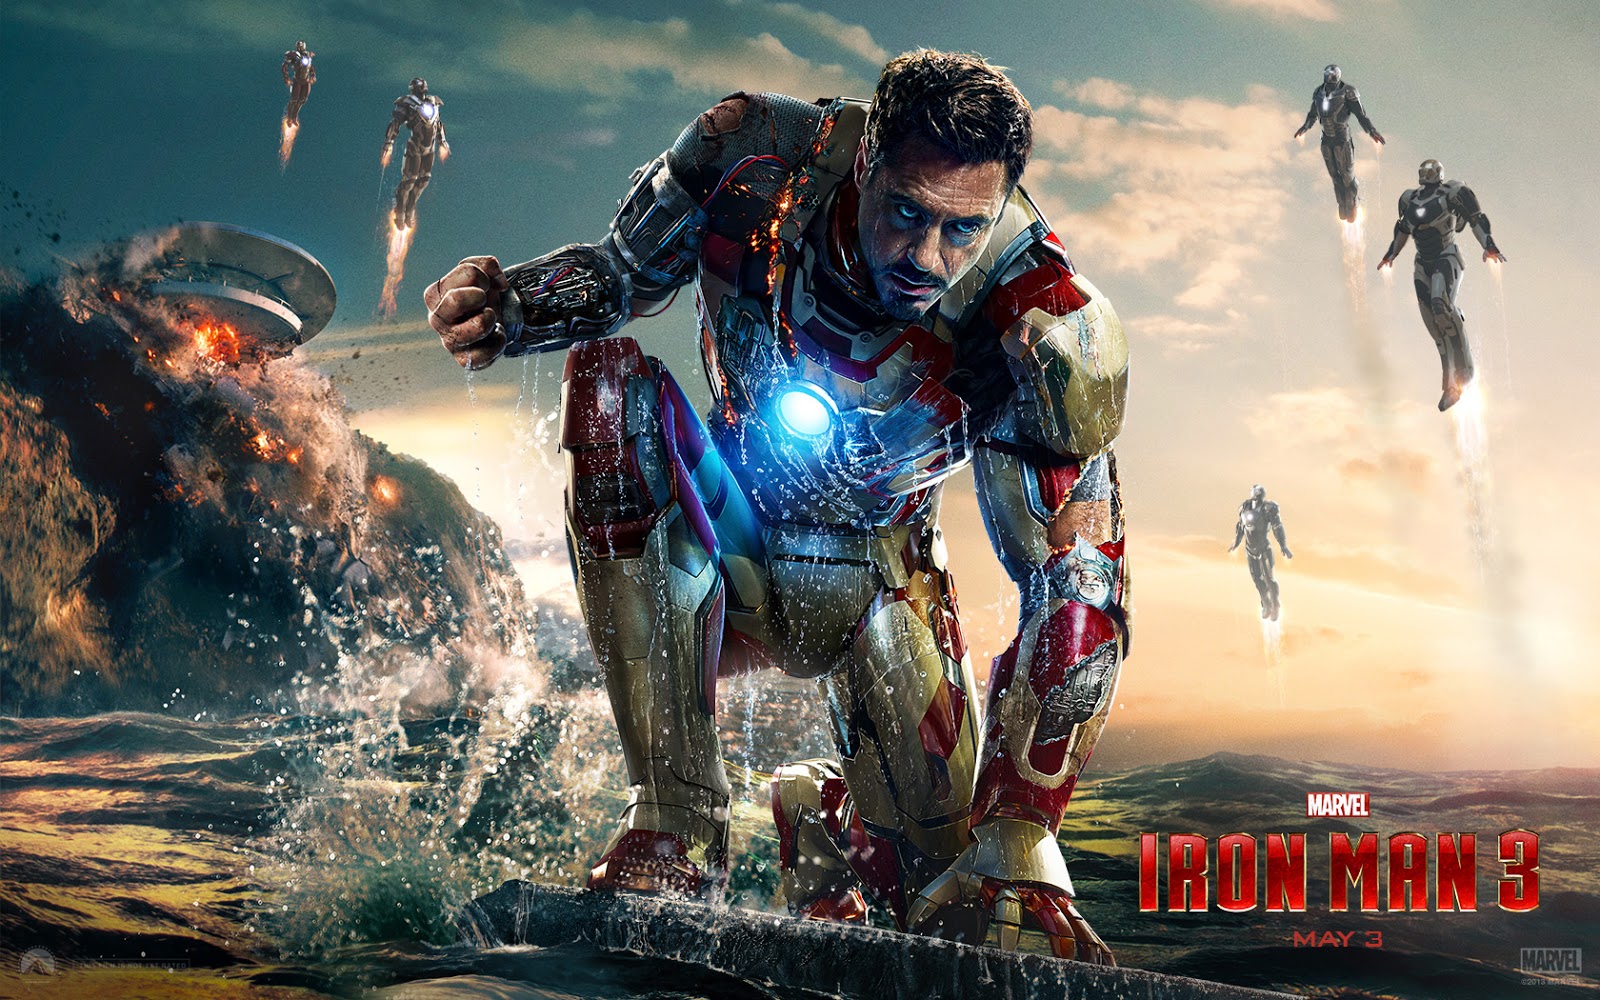 New HD Wallpapers 2013 Most Recent Launched Hollywood Movies 2013 HD 1600x1000